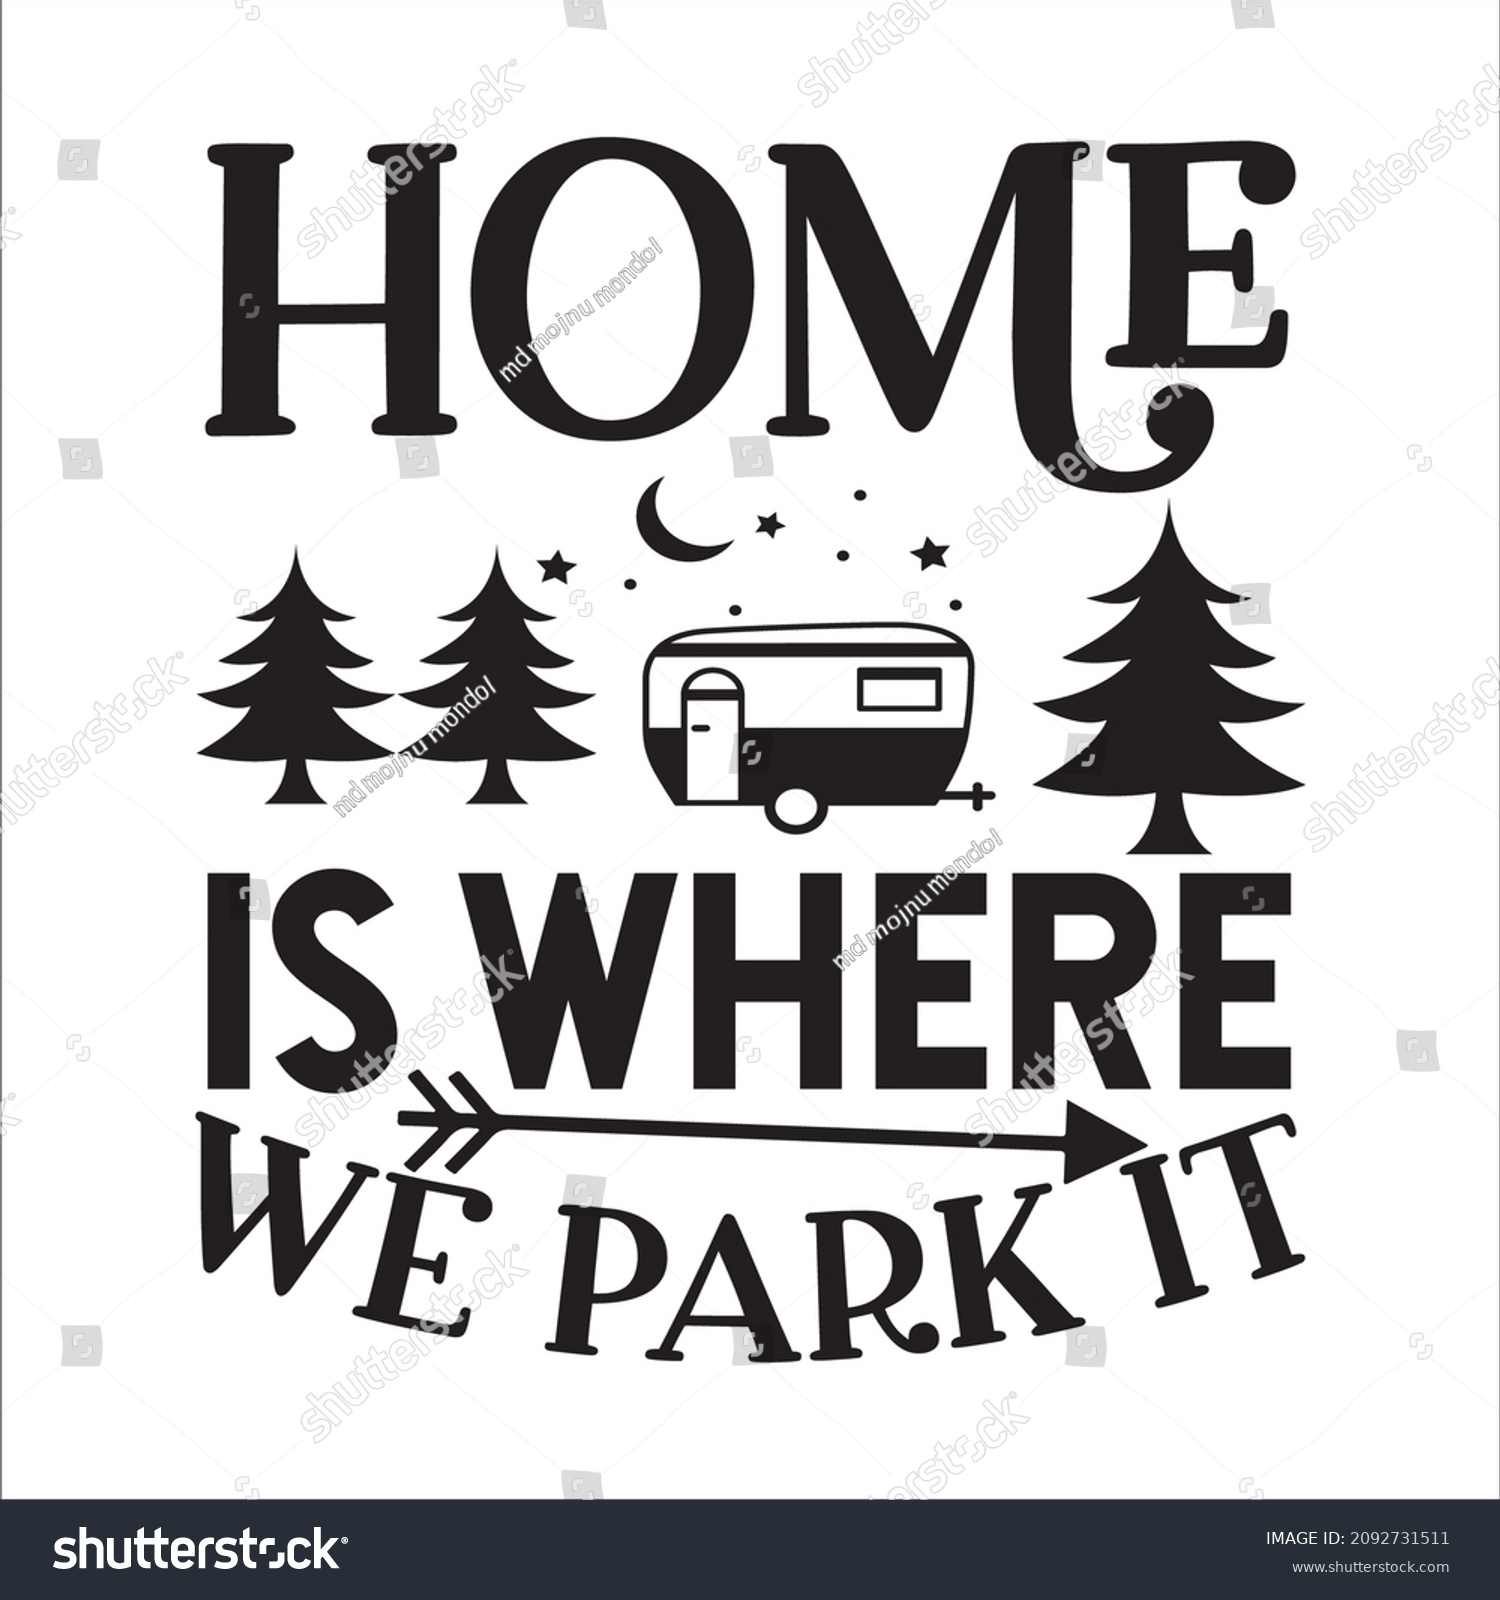 SVG of home is where we park it svg